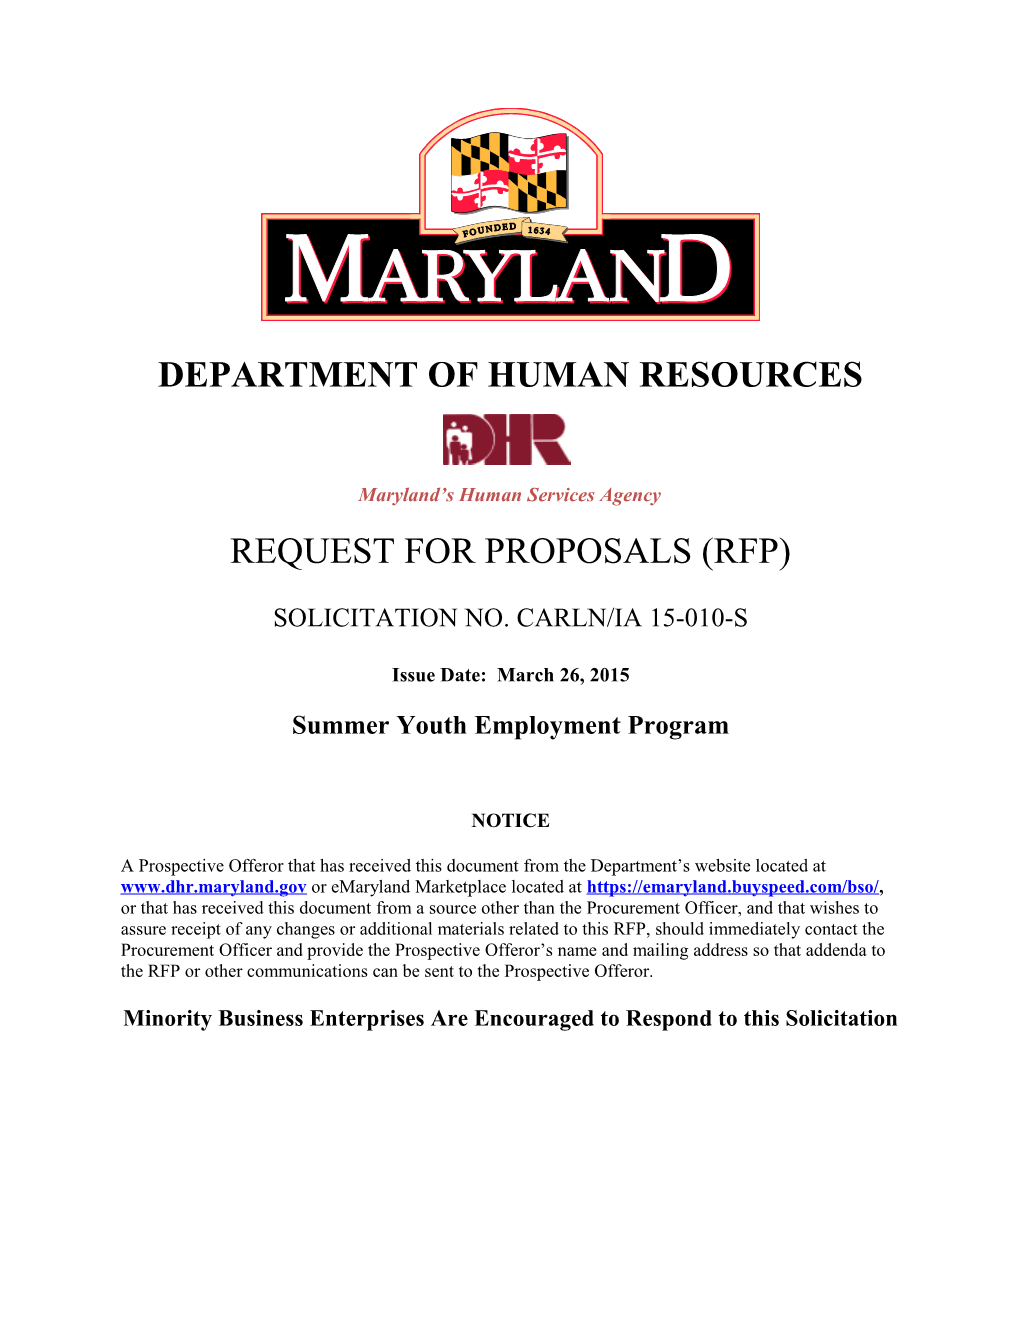 DBM Rrequest for Proposal Template s2